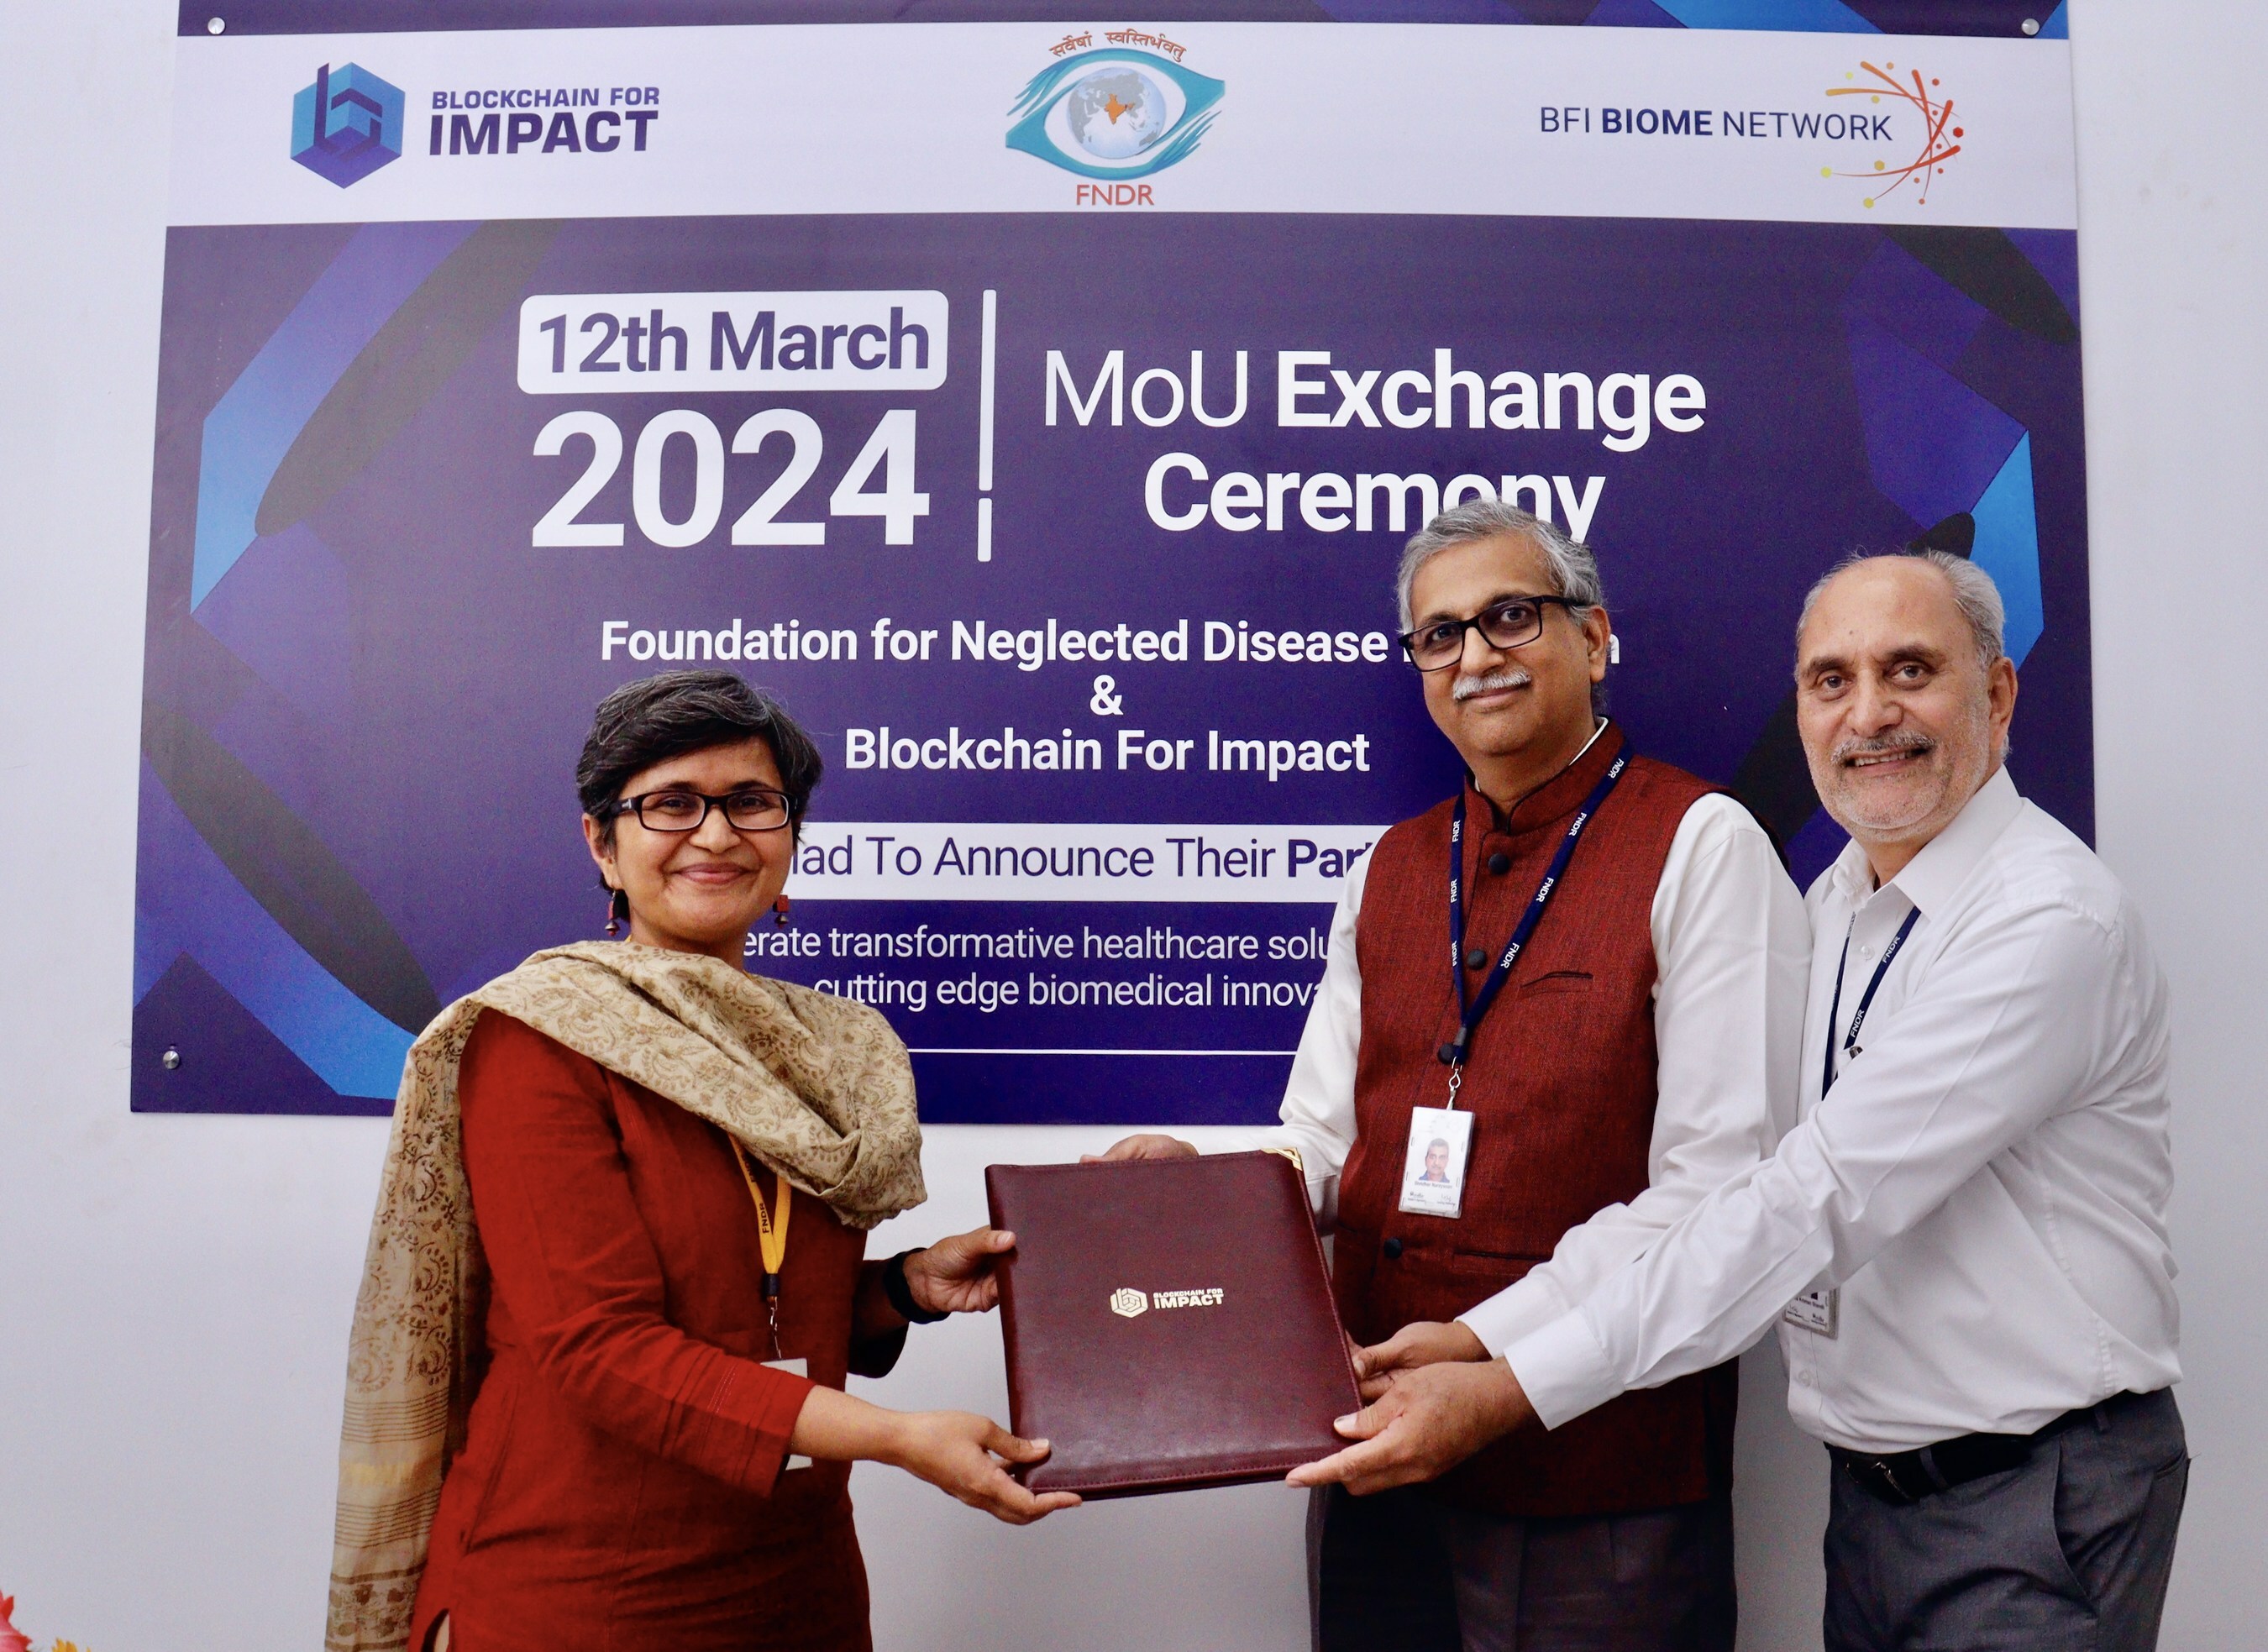 Foundation for Neglected Disease Research, Bangalore and Blockchain For Impact (BFI) Collaborate to Accelerate Biomedical Innovation